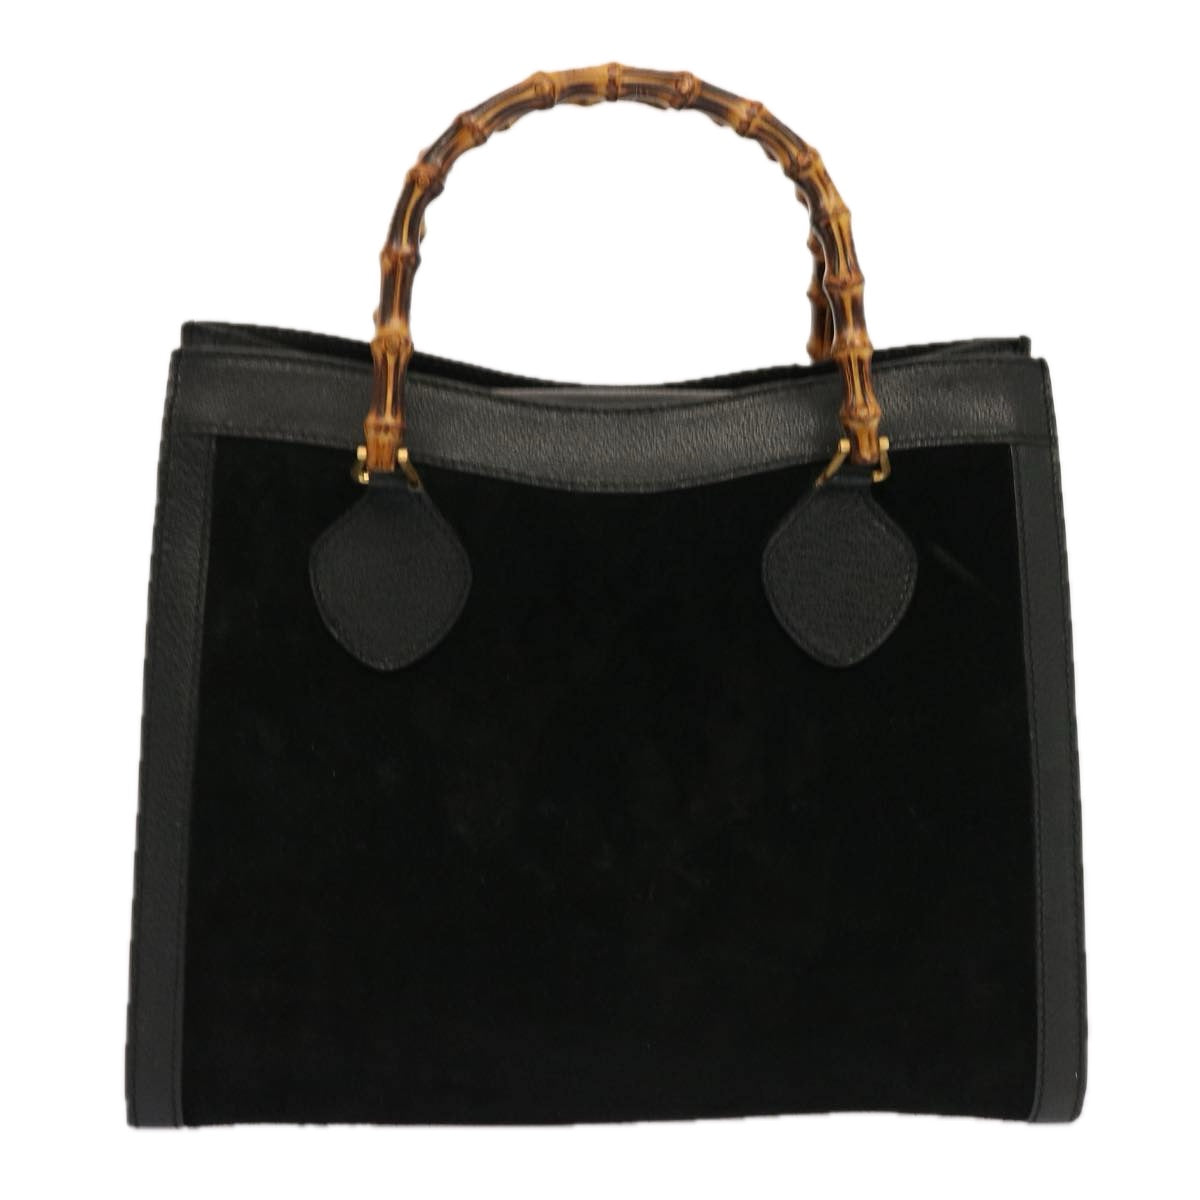 GUCCI Bamboo Tote Bag Suede Black 002 123 0260 Auth ep3848 - 0